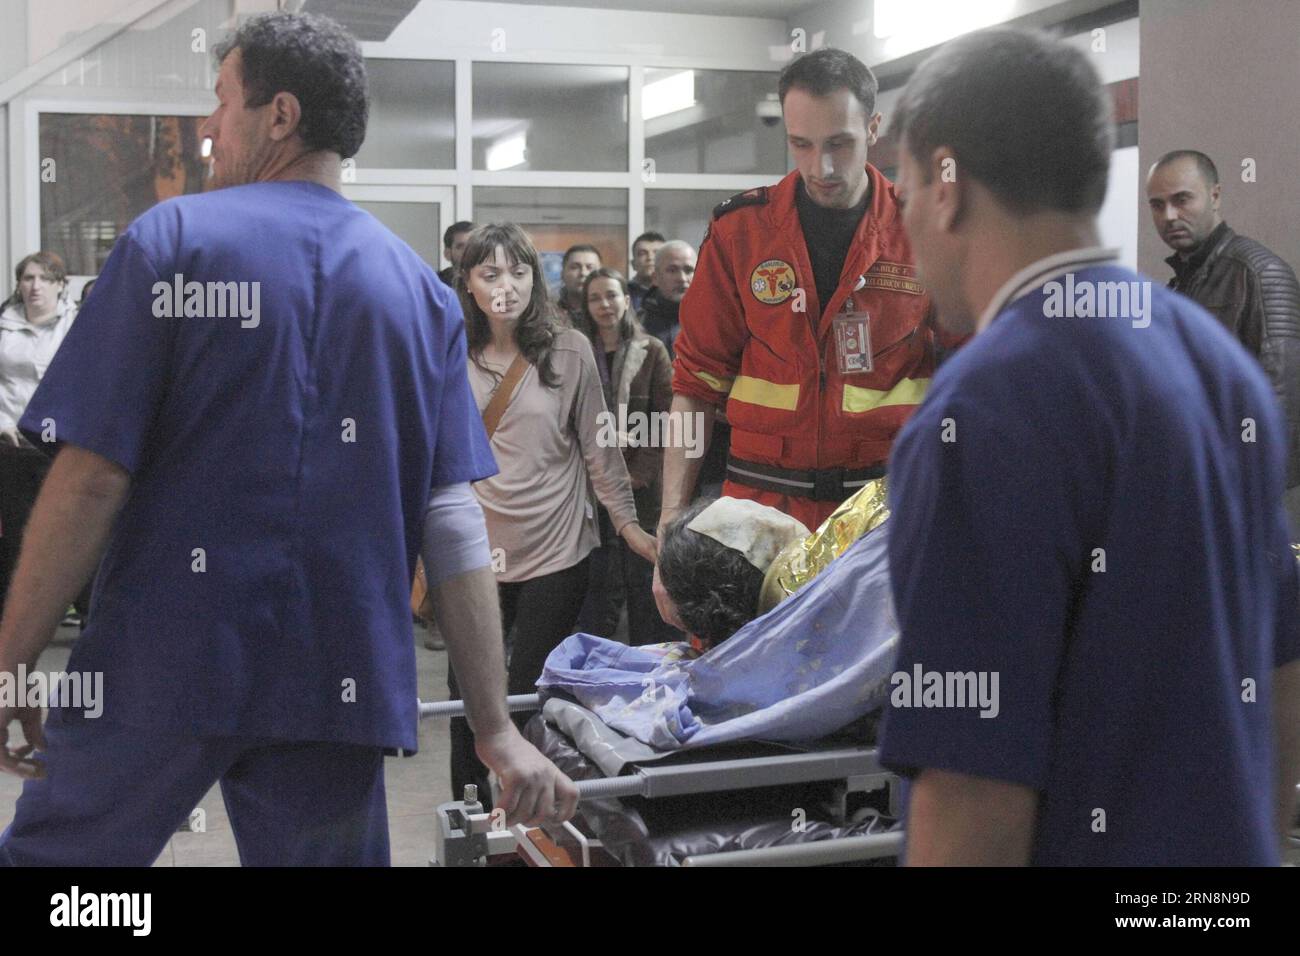 (151031) -- BUCHAREST, Oct. 31, 2015 -- Rescue members transfer an injured person to a hospital in Bucharest, capital city of Romania, Oct. 31, 2015. The nightclub fire late Friday followed by explosions has already caused 26 dead and some 180 wounded in downtown Bucharest, authorities announced early Saturday. ) ROMANIA-BUCHAREST-NIGHTCLUB-FIRE GabrielxPetrescu PUBLICATIONxNOTxINxCHN Rumänien: Tote und Verletzte nach Feuer in Nachtclub in Bukarest   Bucharest OCT 31 2015 Rescue Members Transfer to Injured Person to a Hospital in Bucharest Capital City of Romania OCT 31 2015 The Night Club Fir Stock Photo